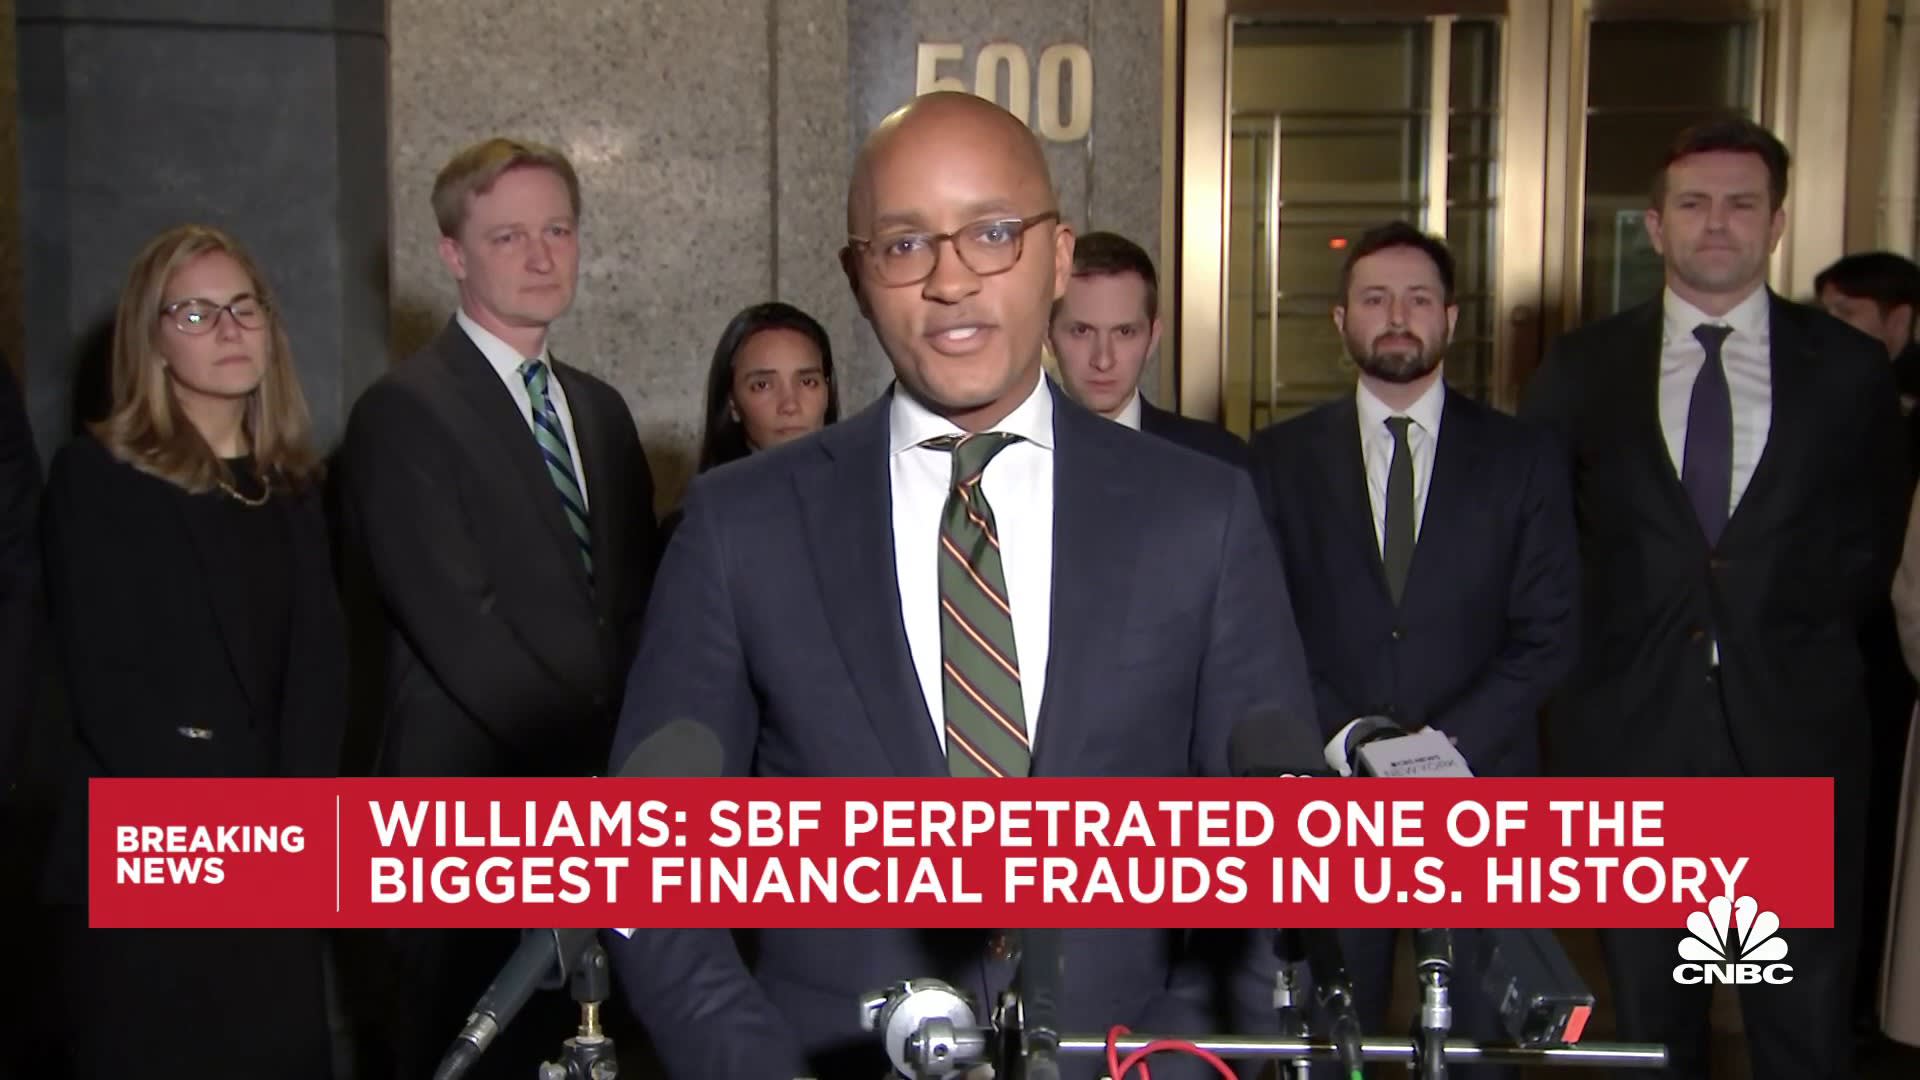 U.S. Attorney Williams: SBF perpetrated one of the biggest financial crimes in U.S. history